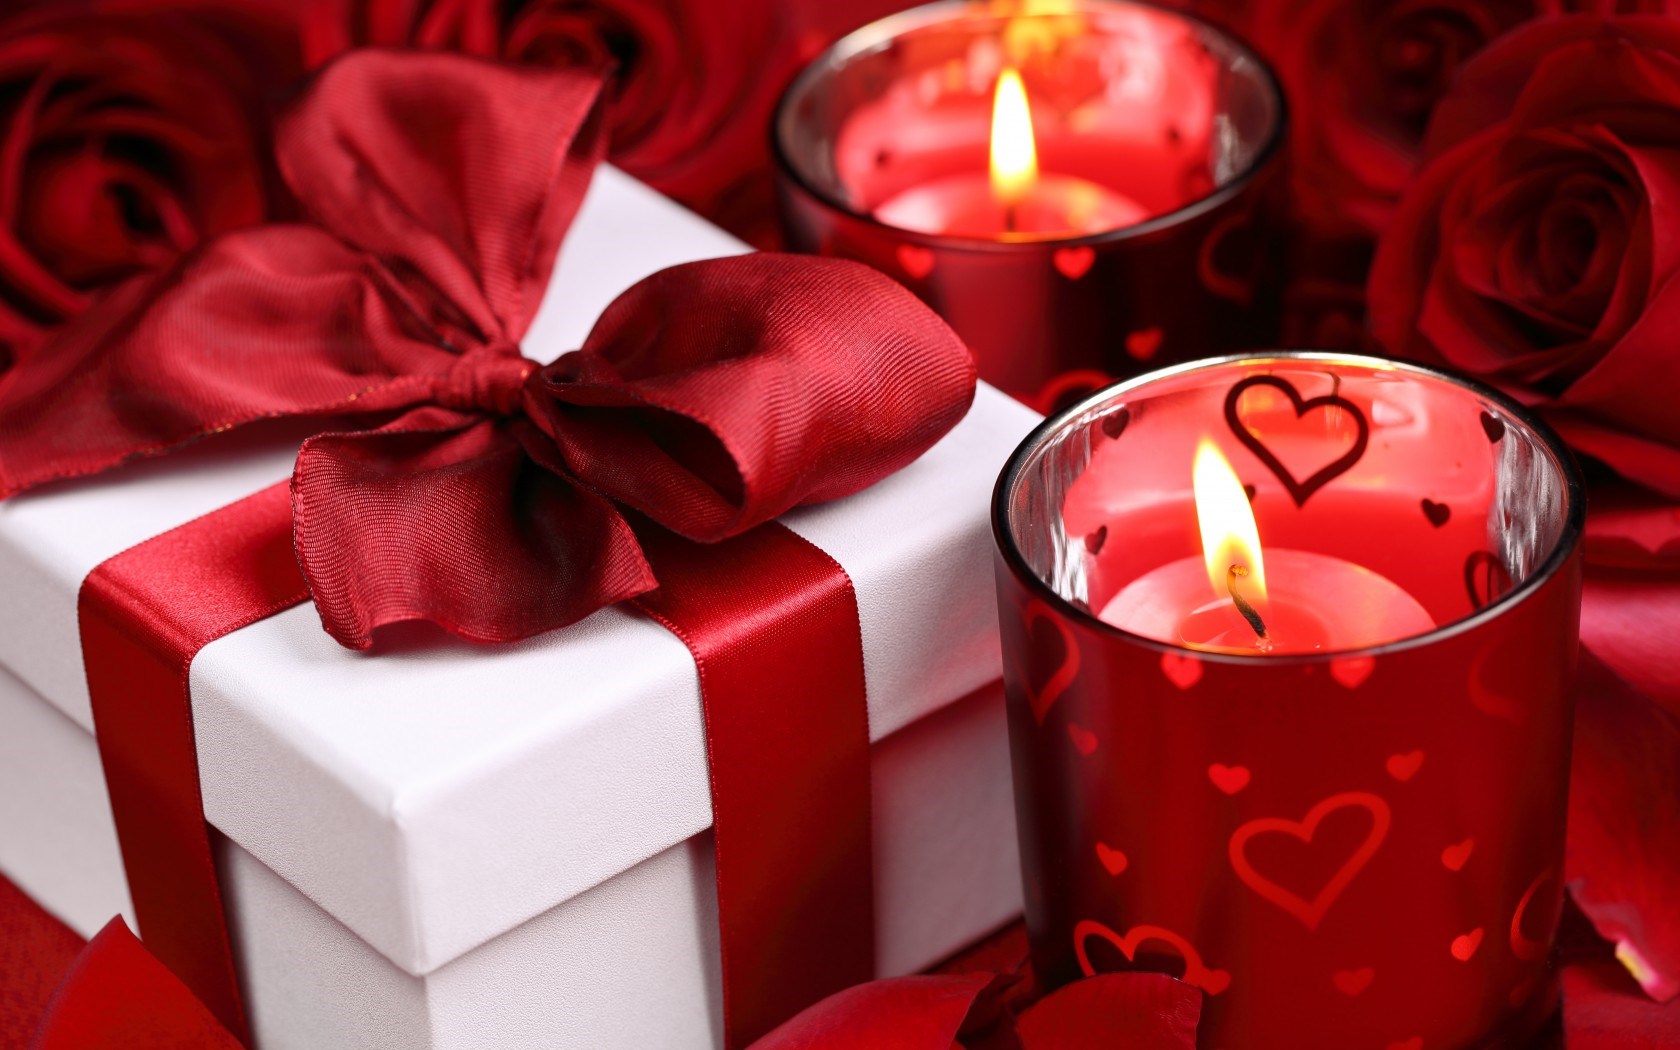 6915484-roses-gift-candles-hearts-valentines-day-love